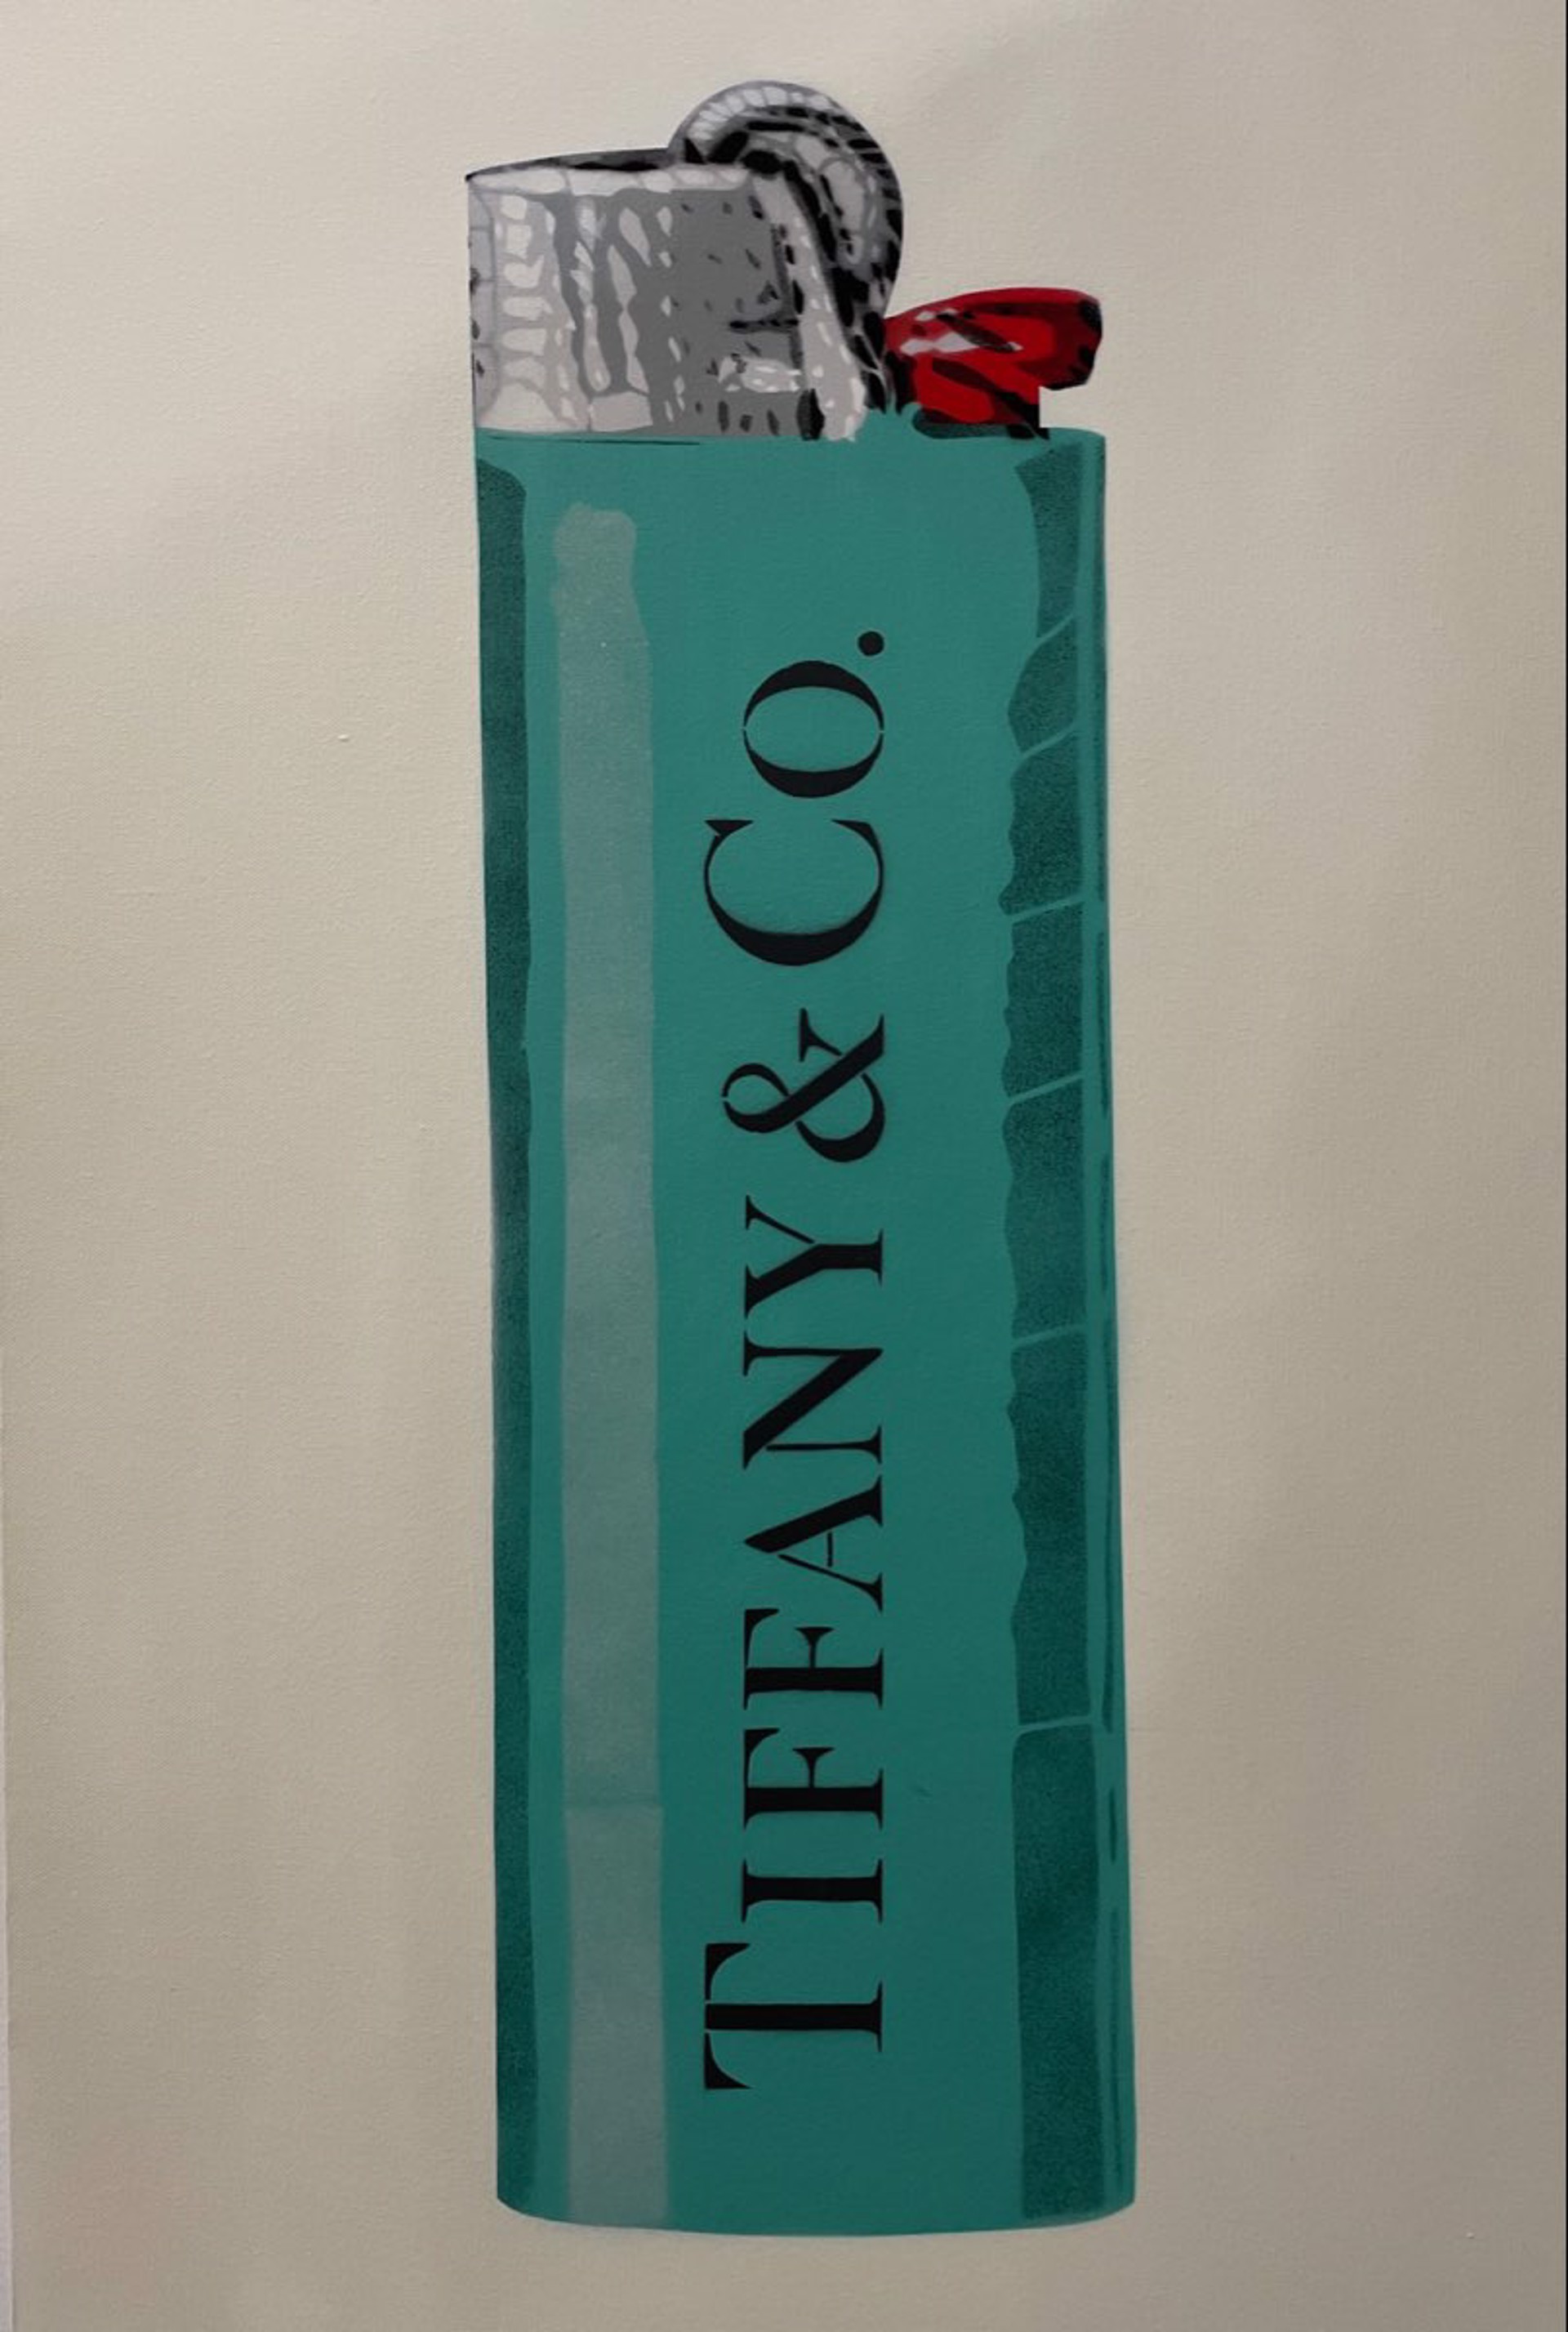 Tiffany & Co. Lighter by David Lowell